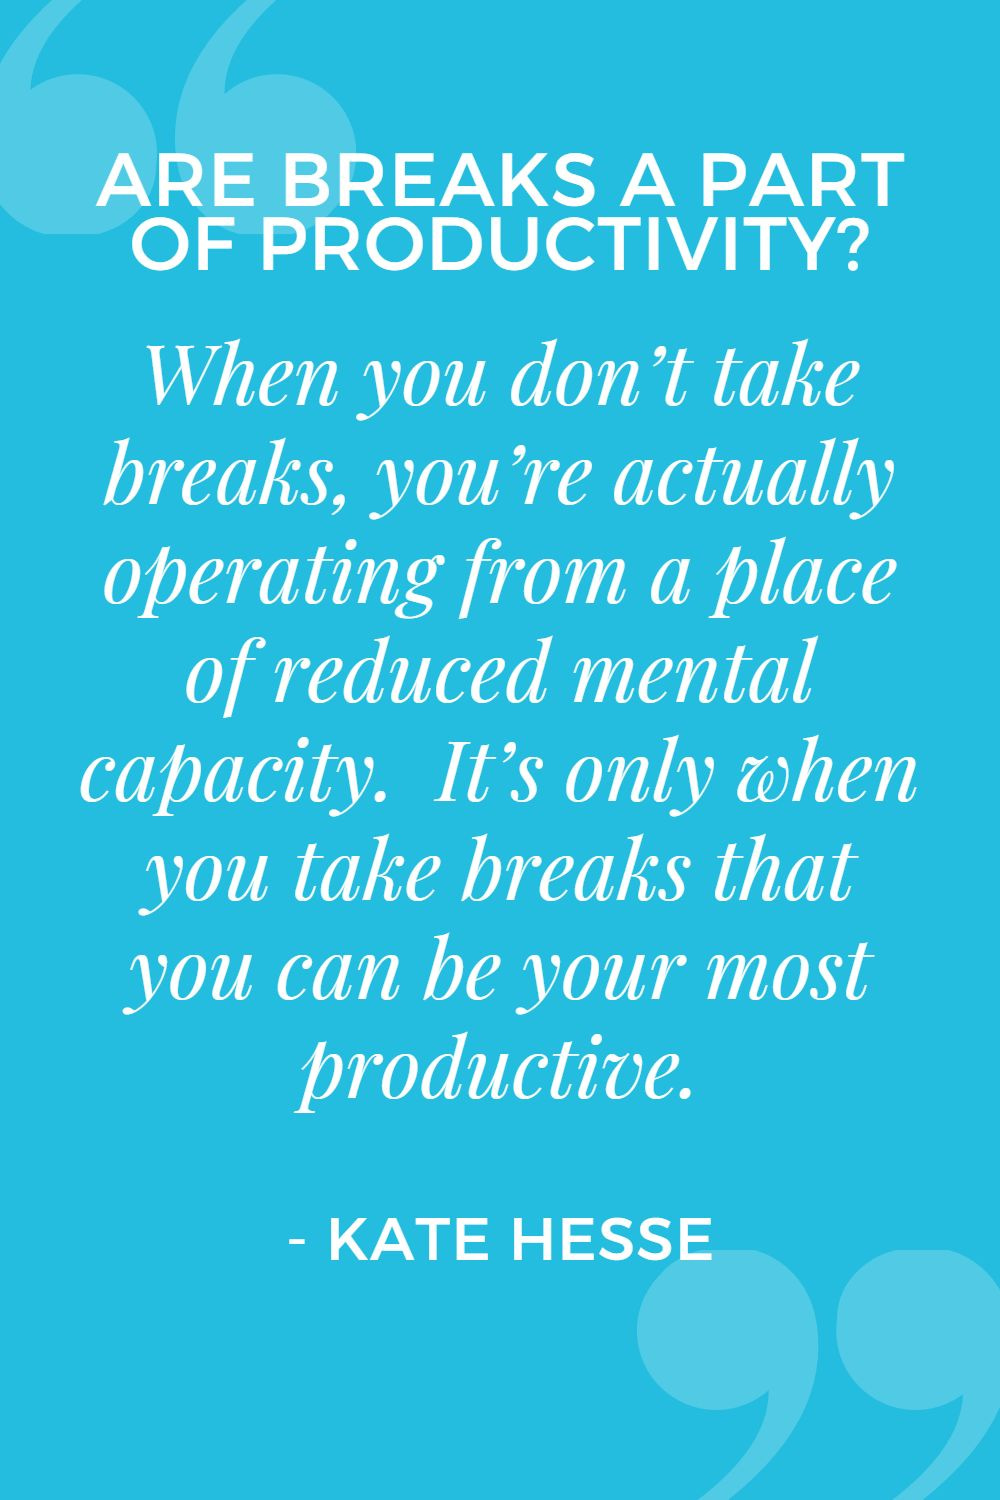 When you don't take breaks, you're actually operating from a place of reduced mental capacity. It's only when you take breaks that you can be your most productive.